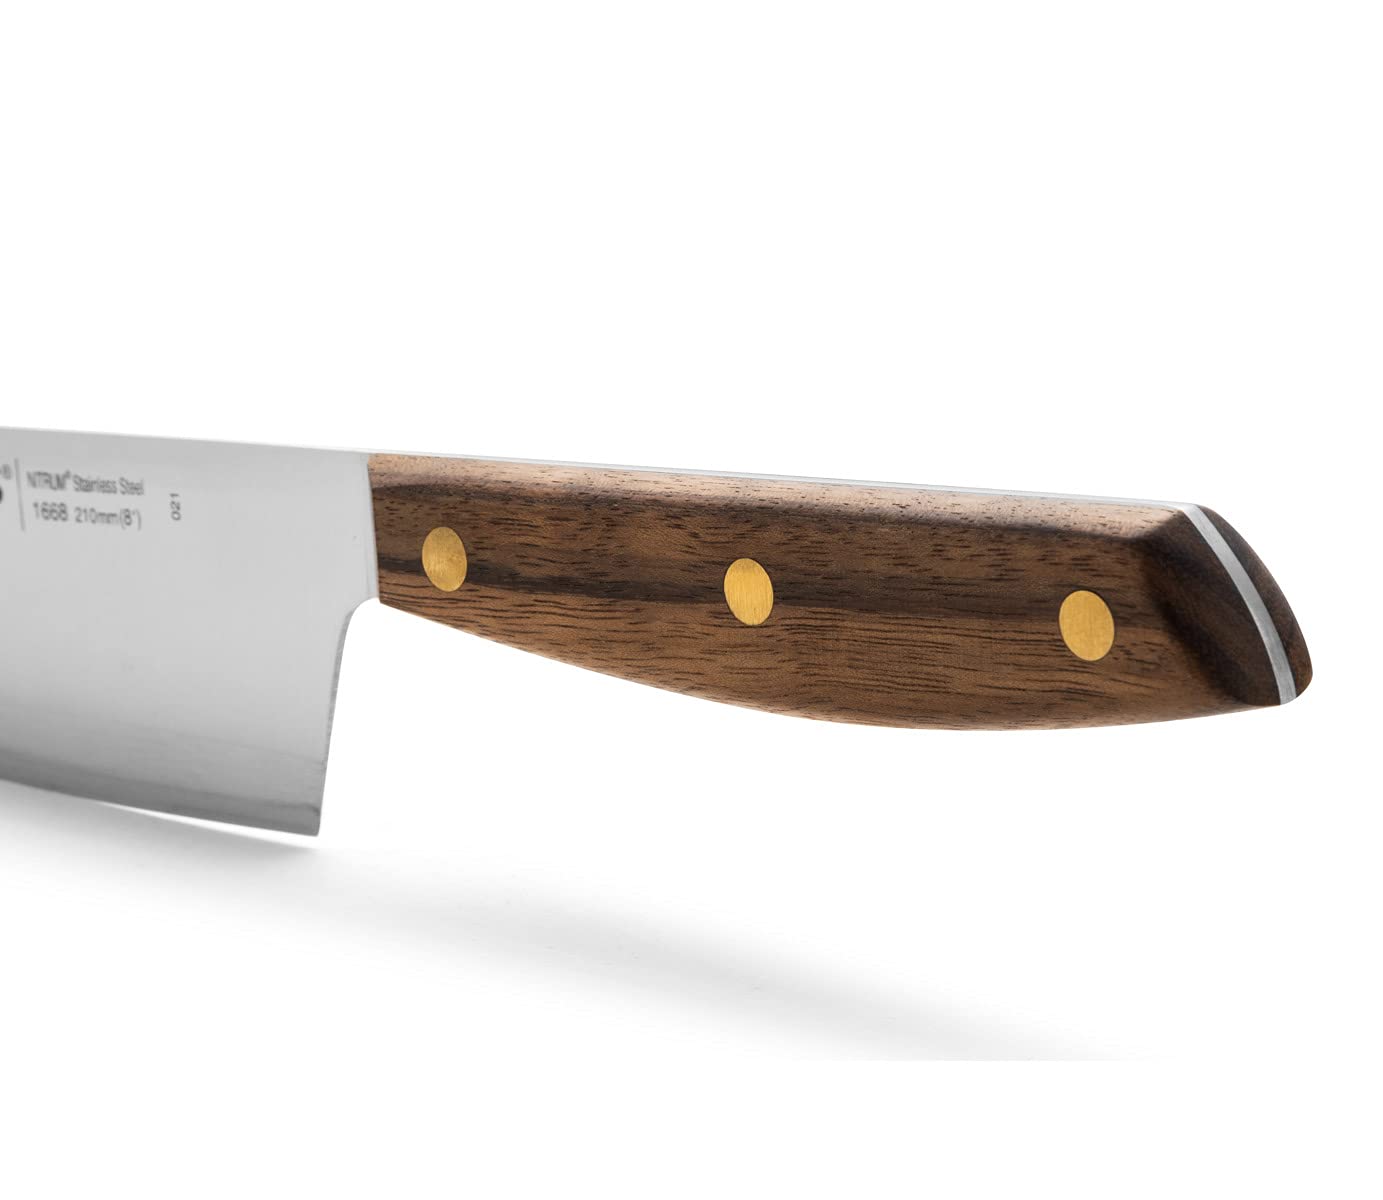 ARCOS Chef Knife 8 Inch Stainless Steel. Professional Kitchen Knife for Cooking. Ovengkol Wood Handle 100% natural FSC and 210 mm Blade. Series Nordika